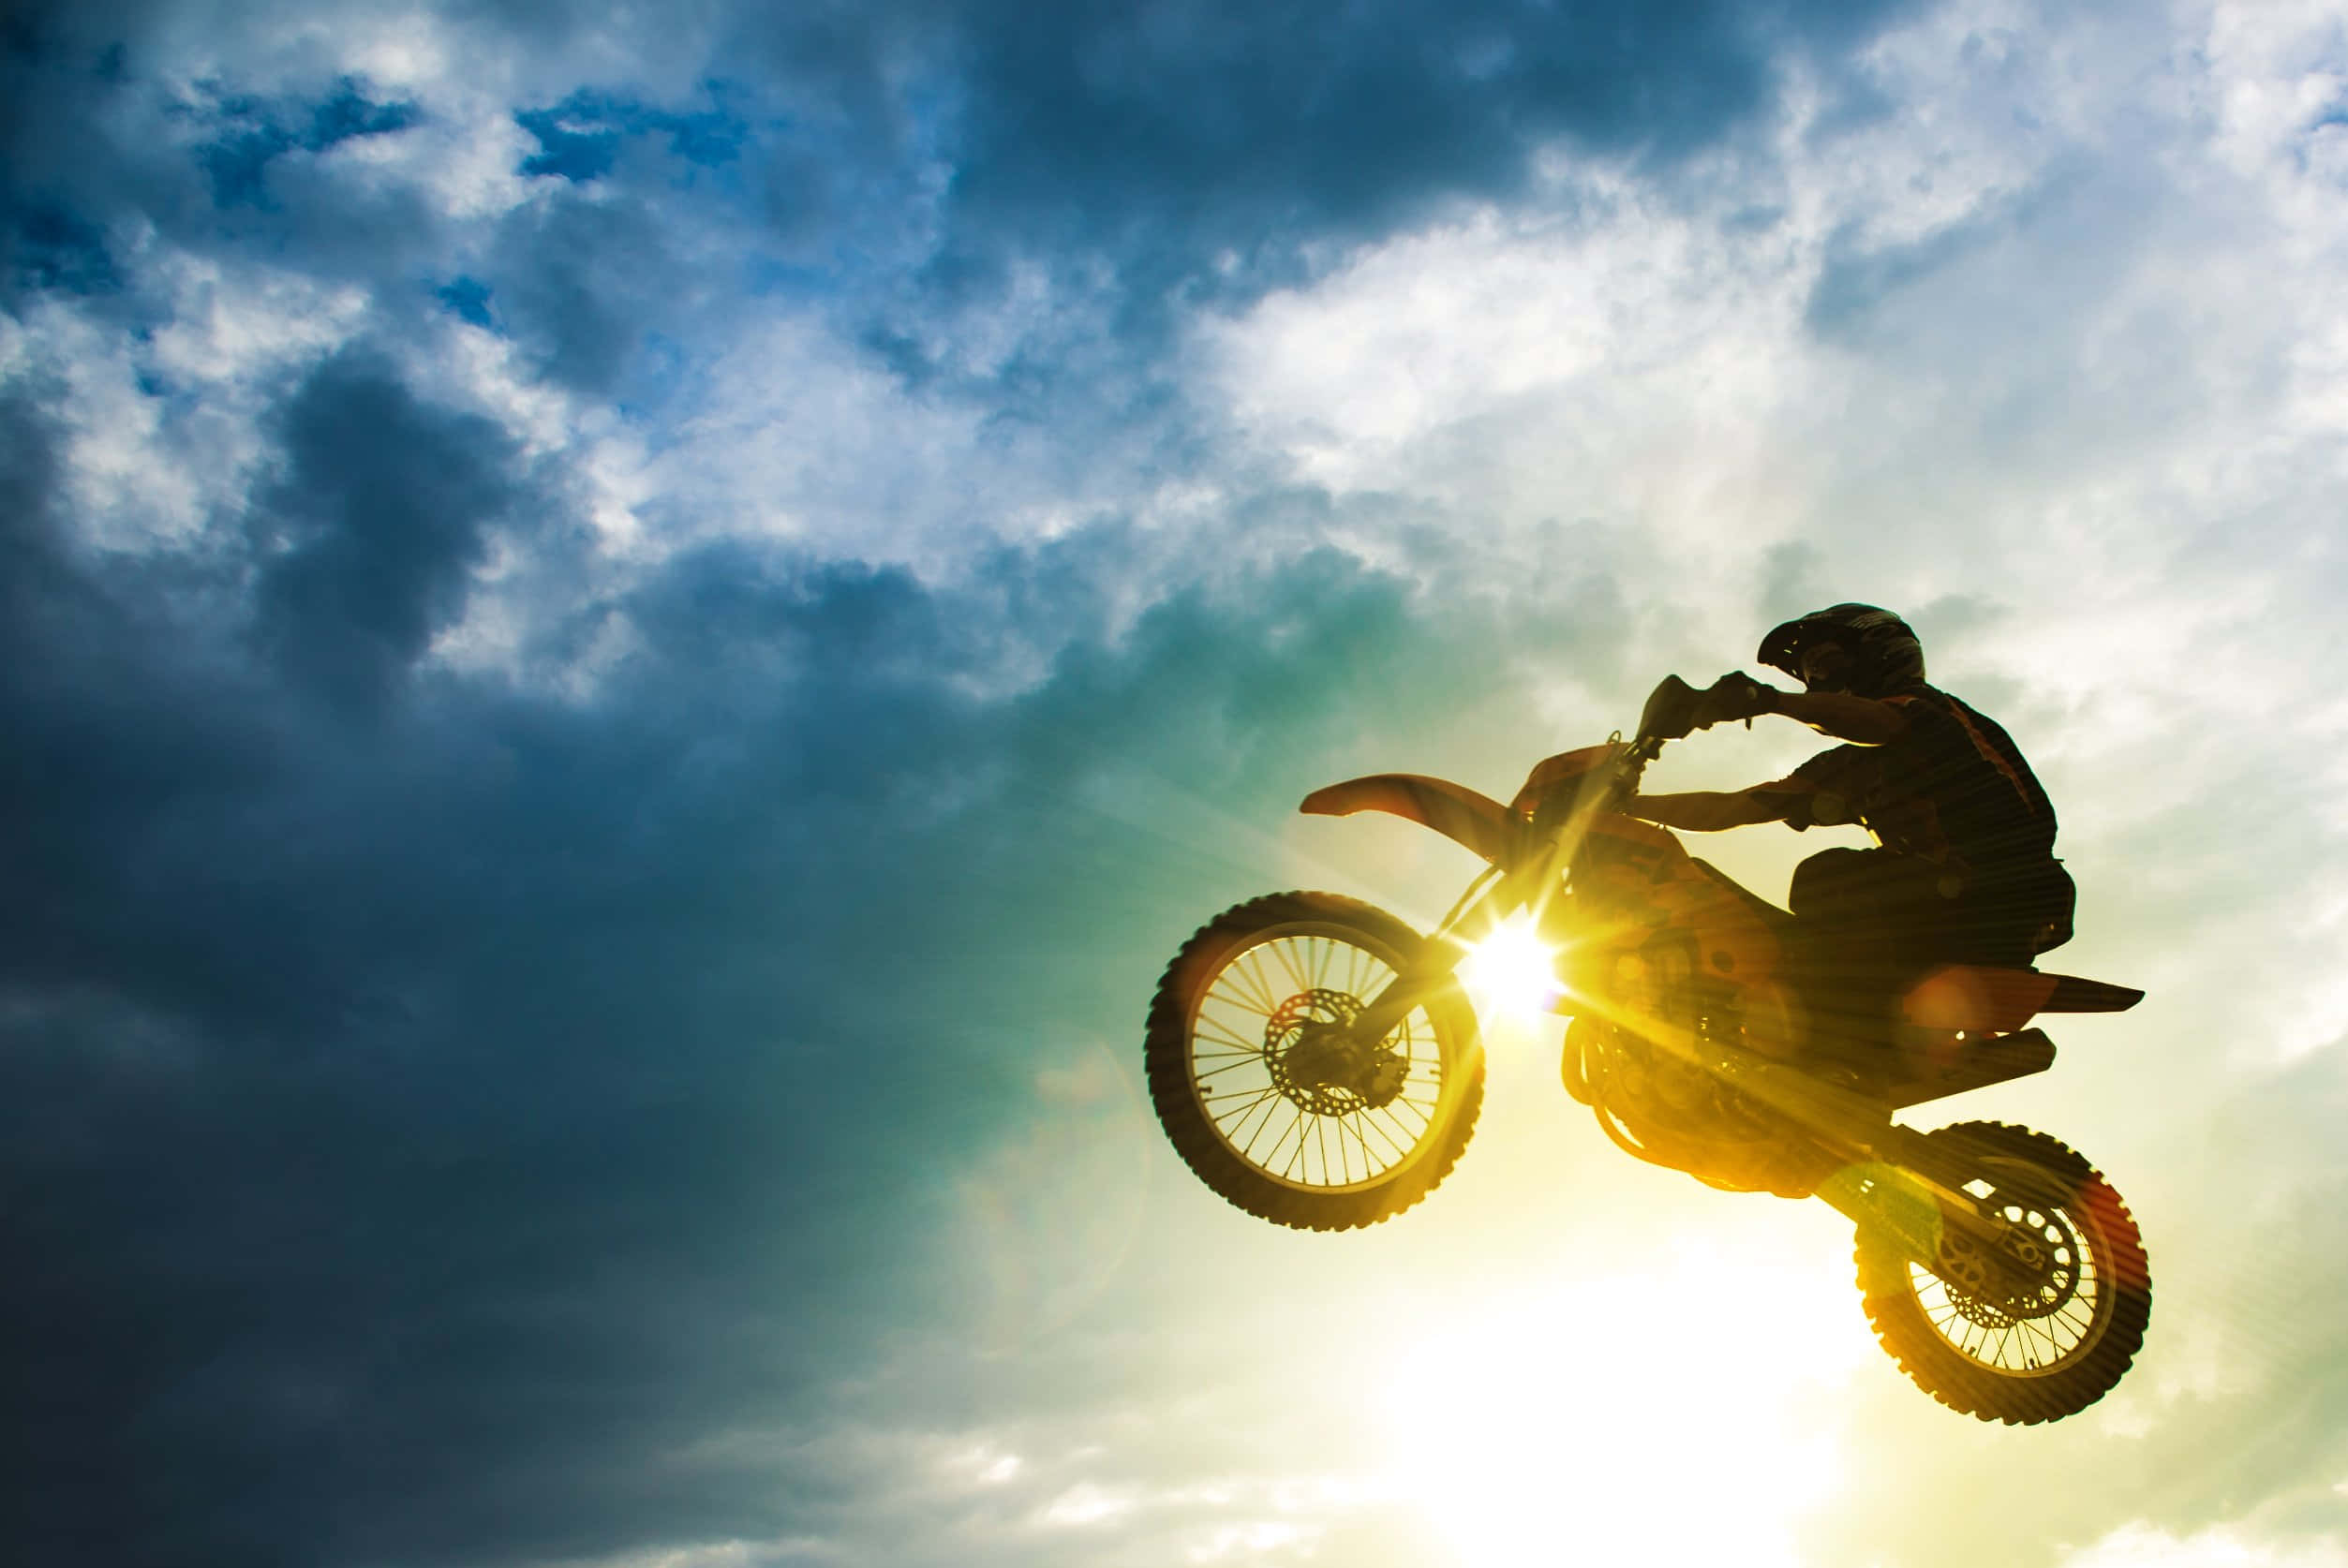 High-flying motocross rider conquering the dirt track